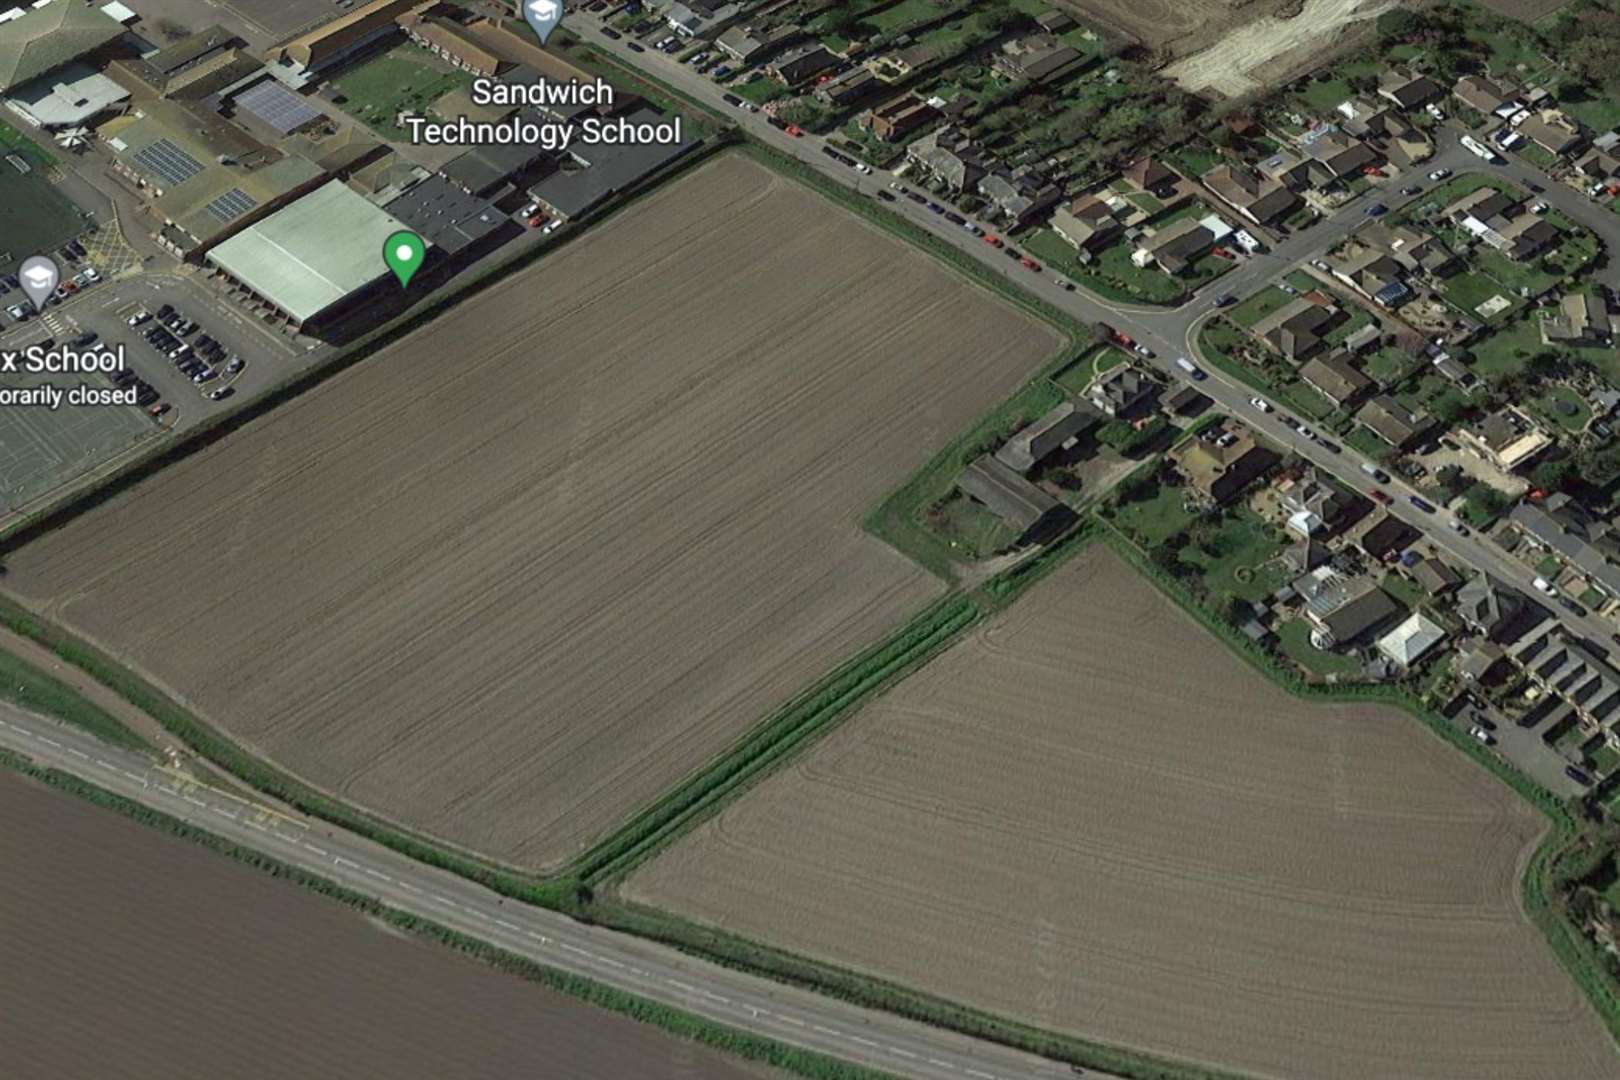 The land which the sports facility was going to be built on in Deal Road, Sandwich. Picture: Google